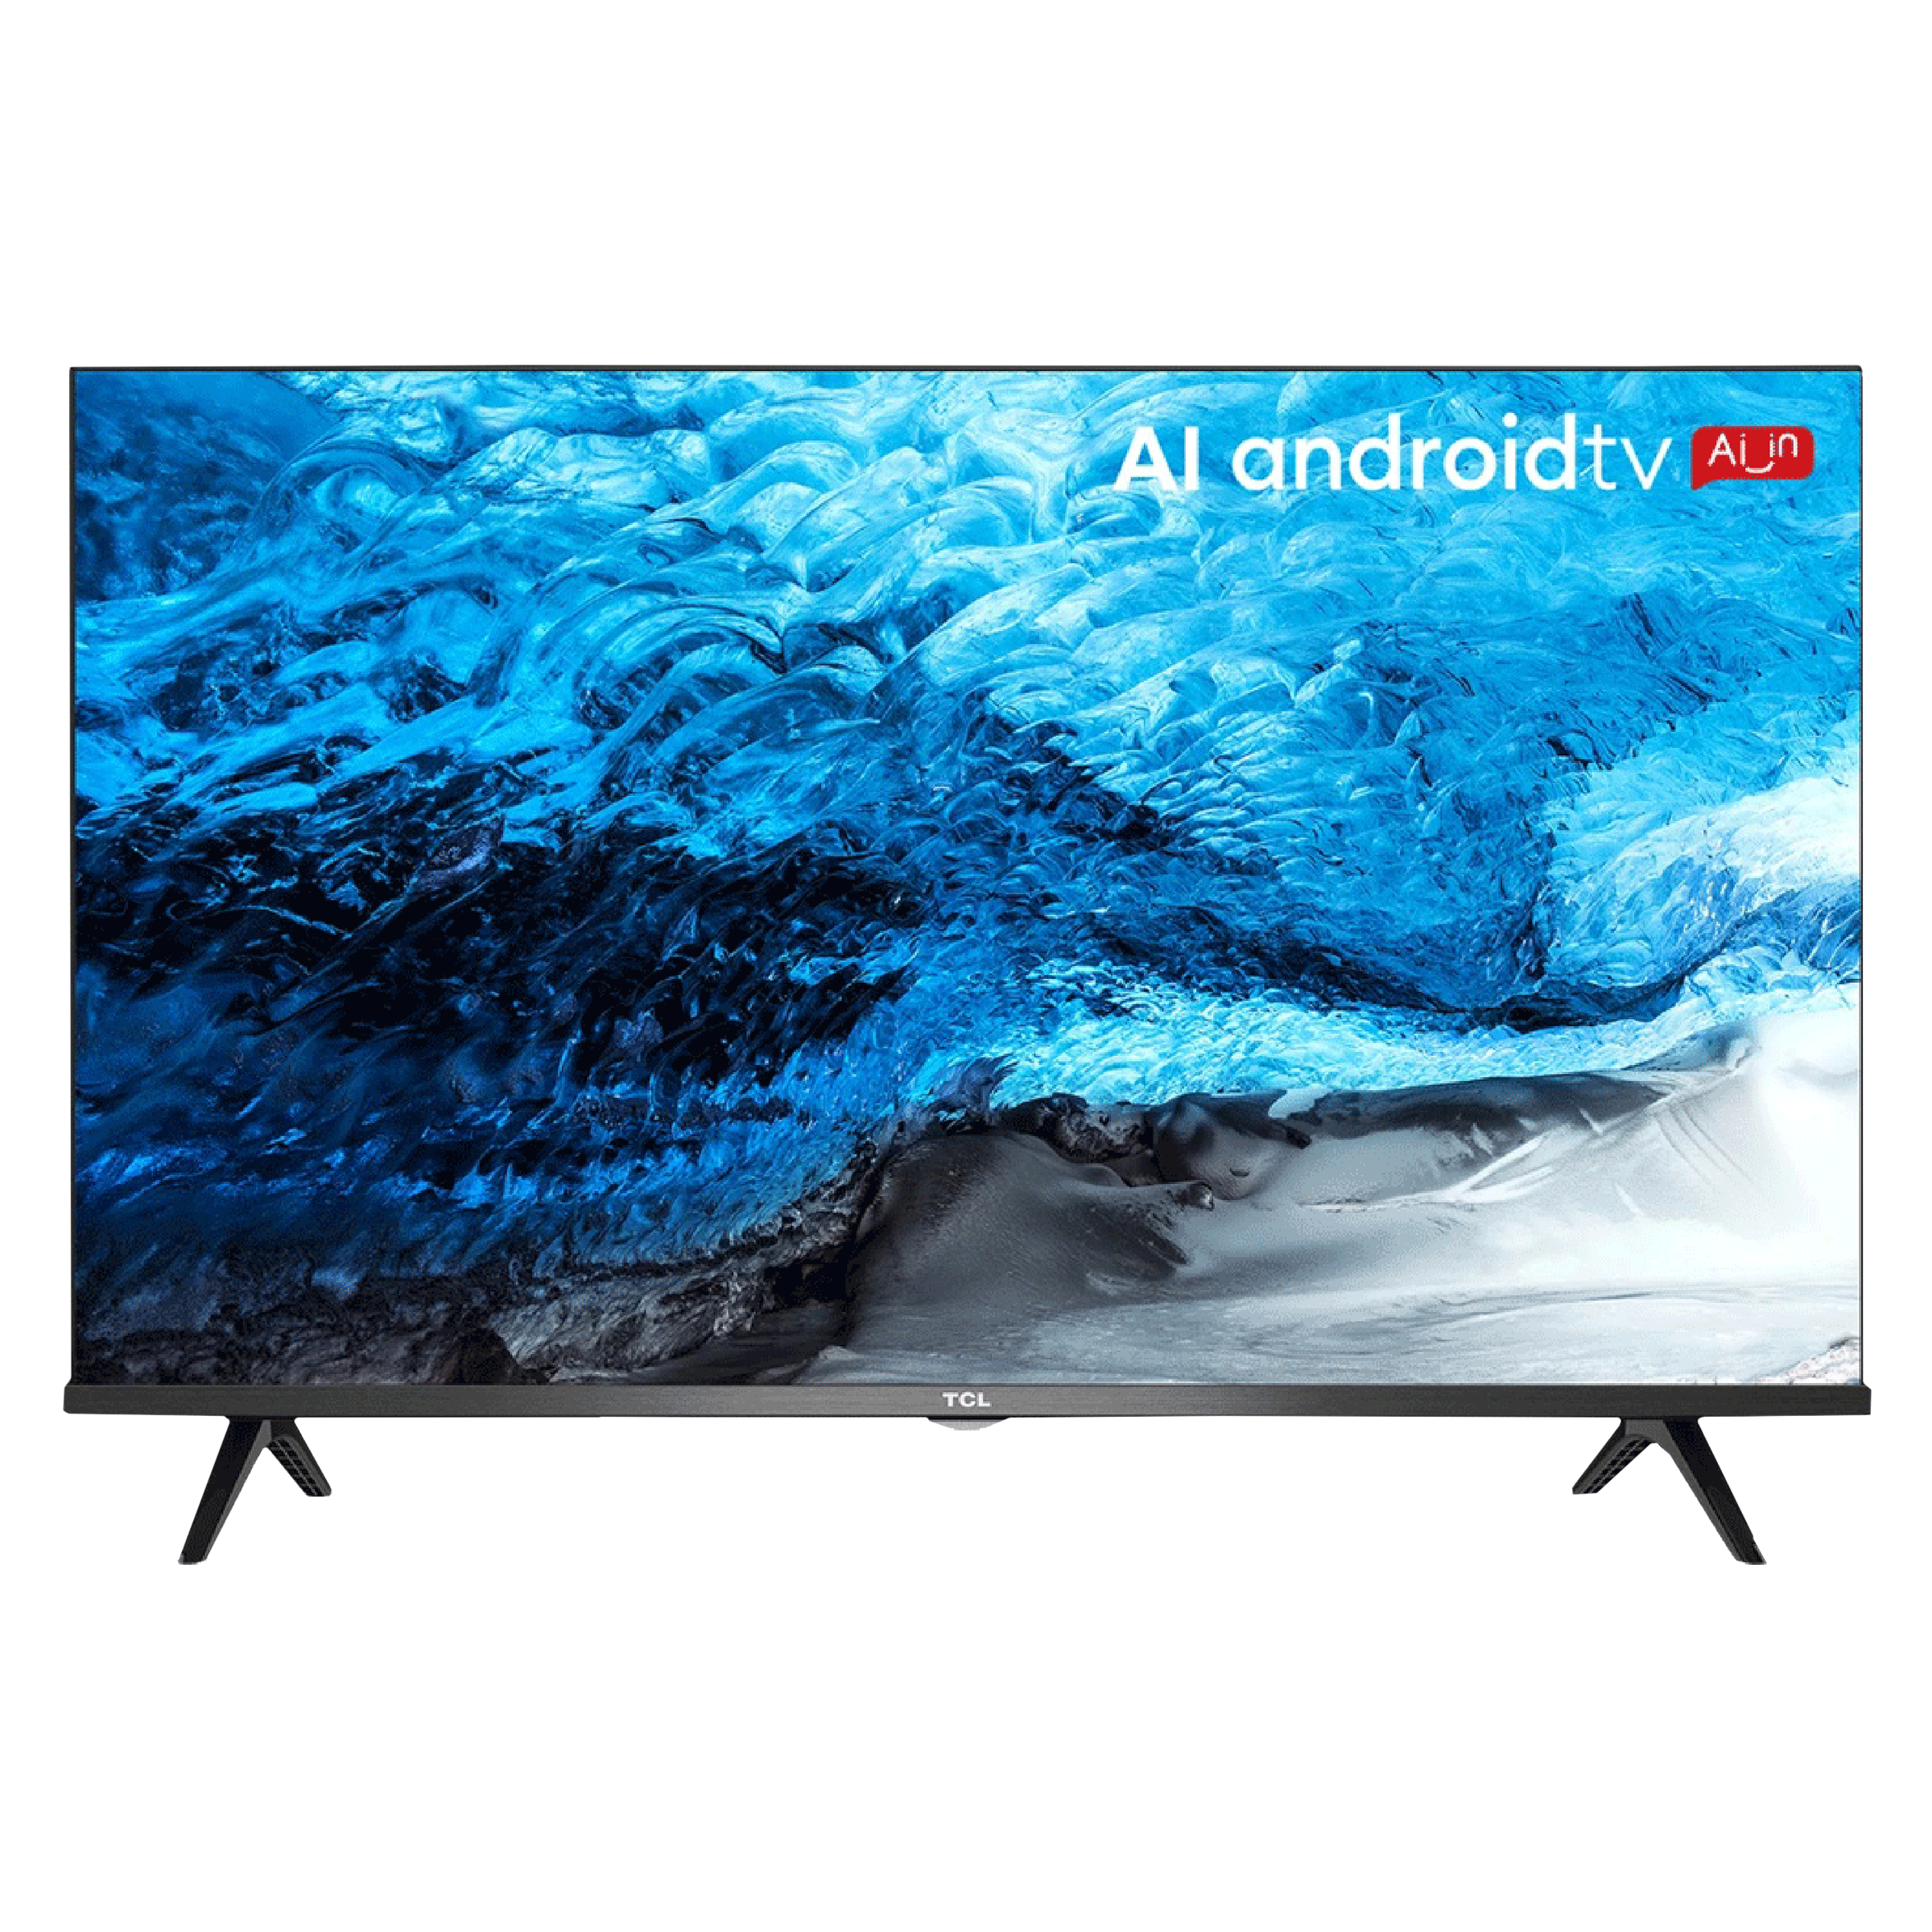 TCL S65A Series 79.97 cm (32 inch) HD Ready LED Smart Android TV with Google Assistant (2021 model)_1